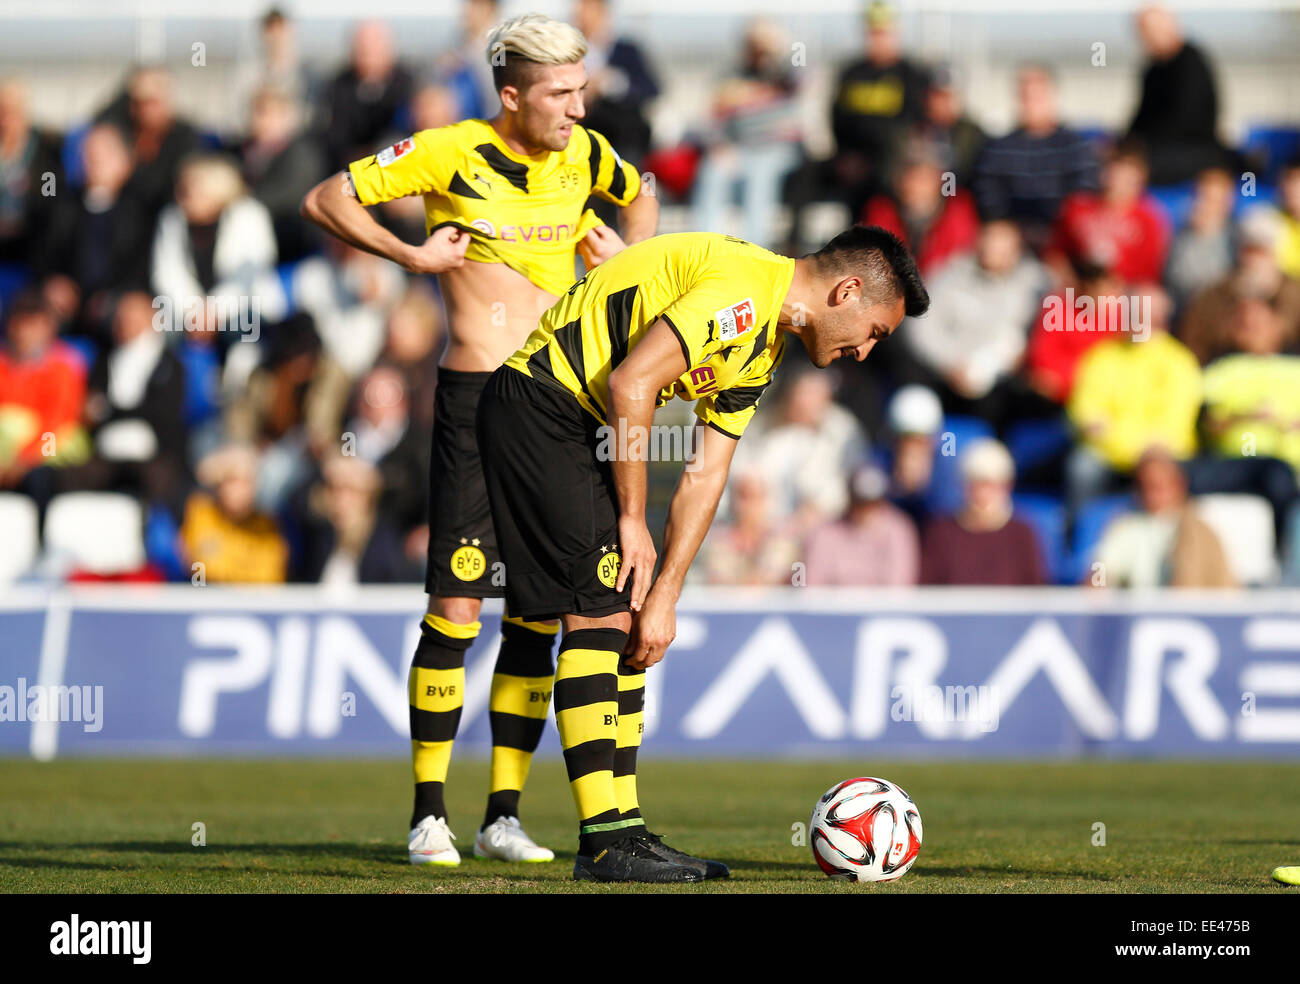 San Pedro del Pinatar, Spain. 13rd January, 2015. Friendly football match between Borussia Dortmund vs FC Sion in the Pinatar Arena Sport Center Credit:  ABEL F. ROS/Alamy Live News Stock Photo